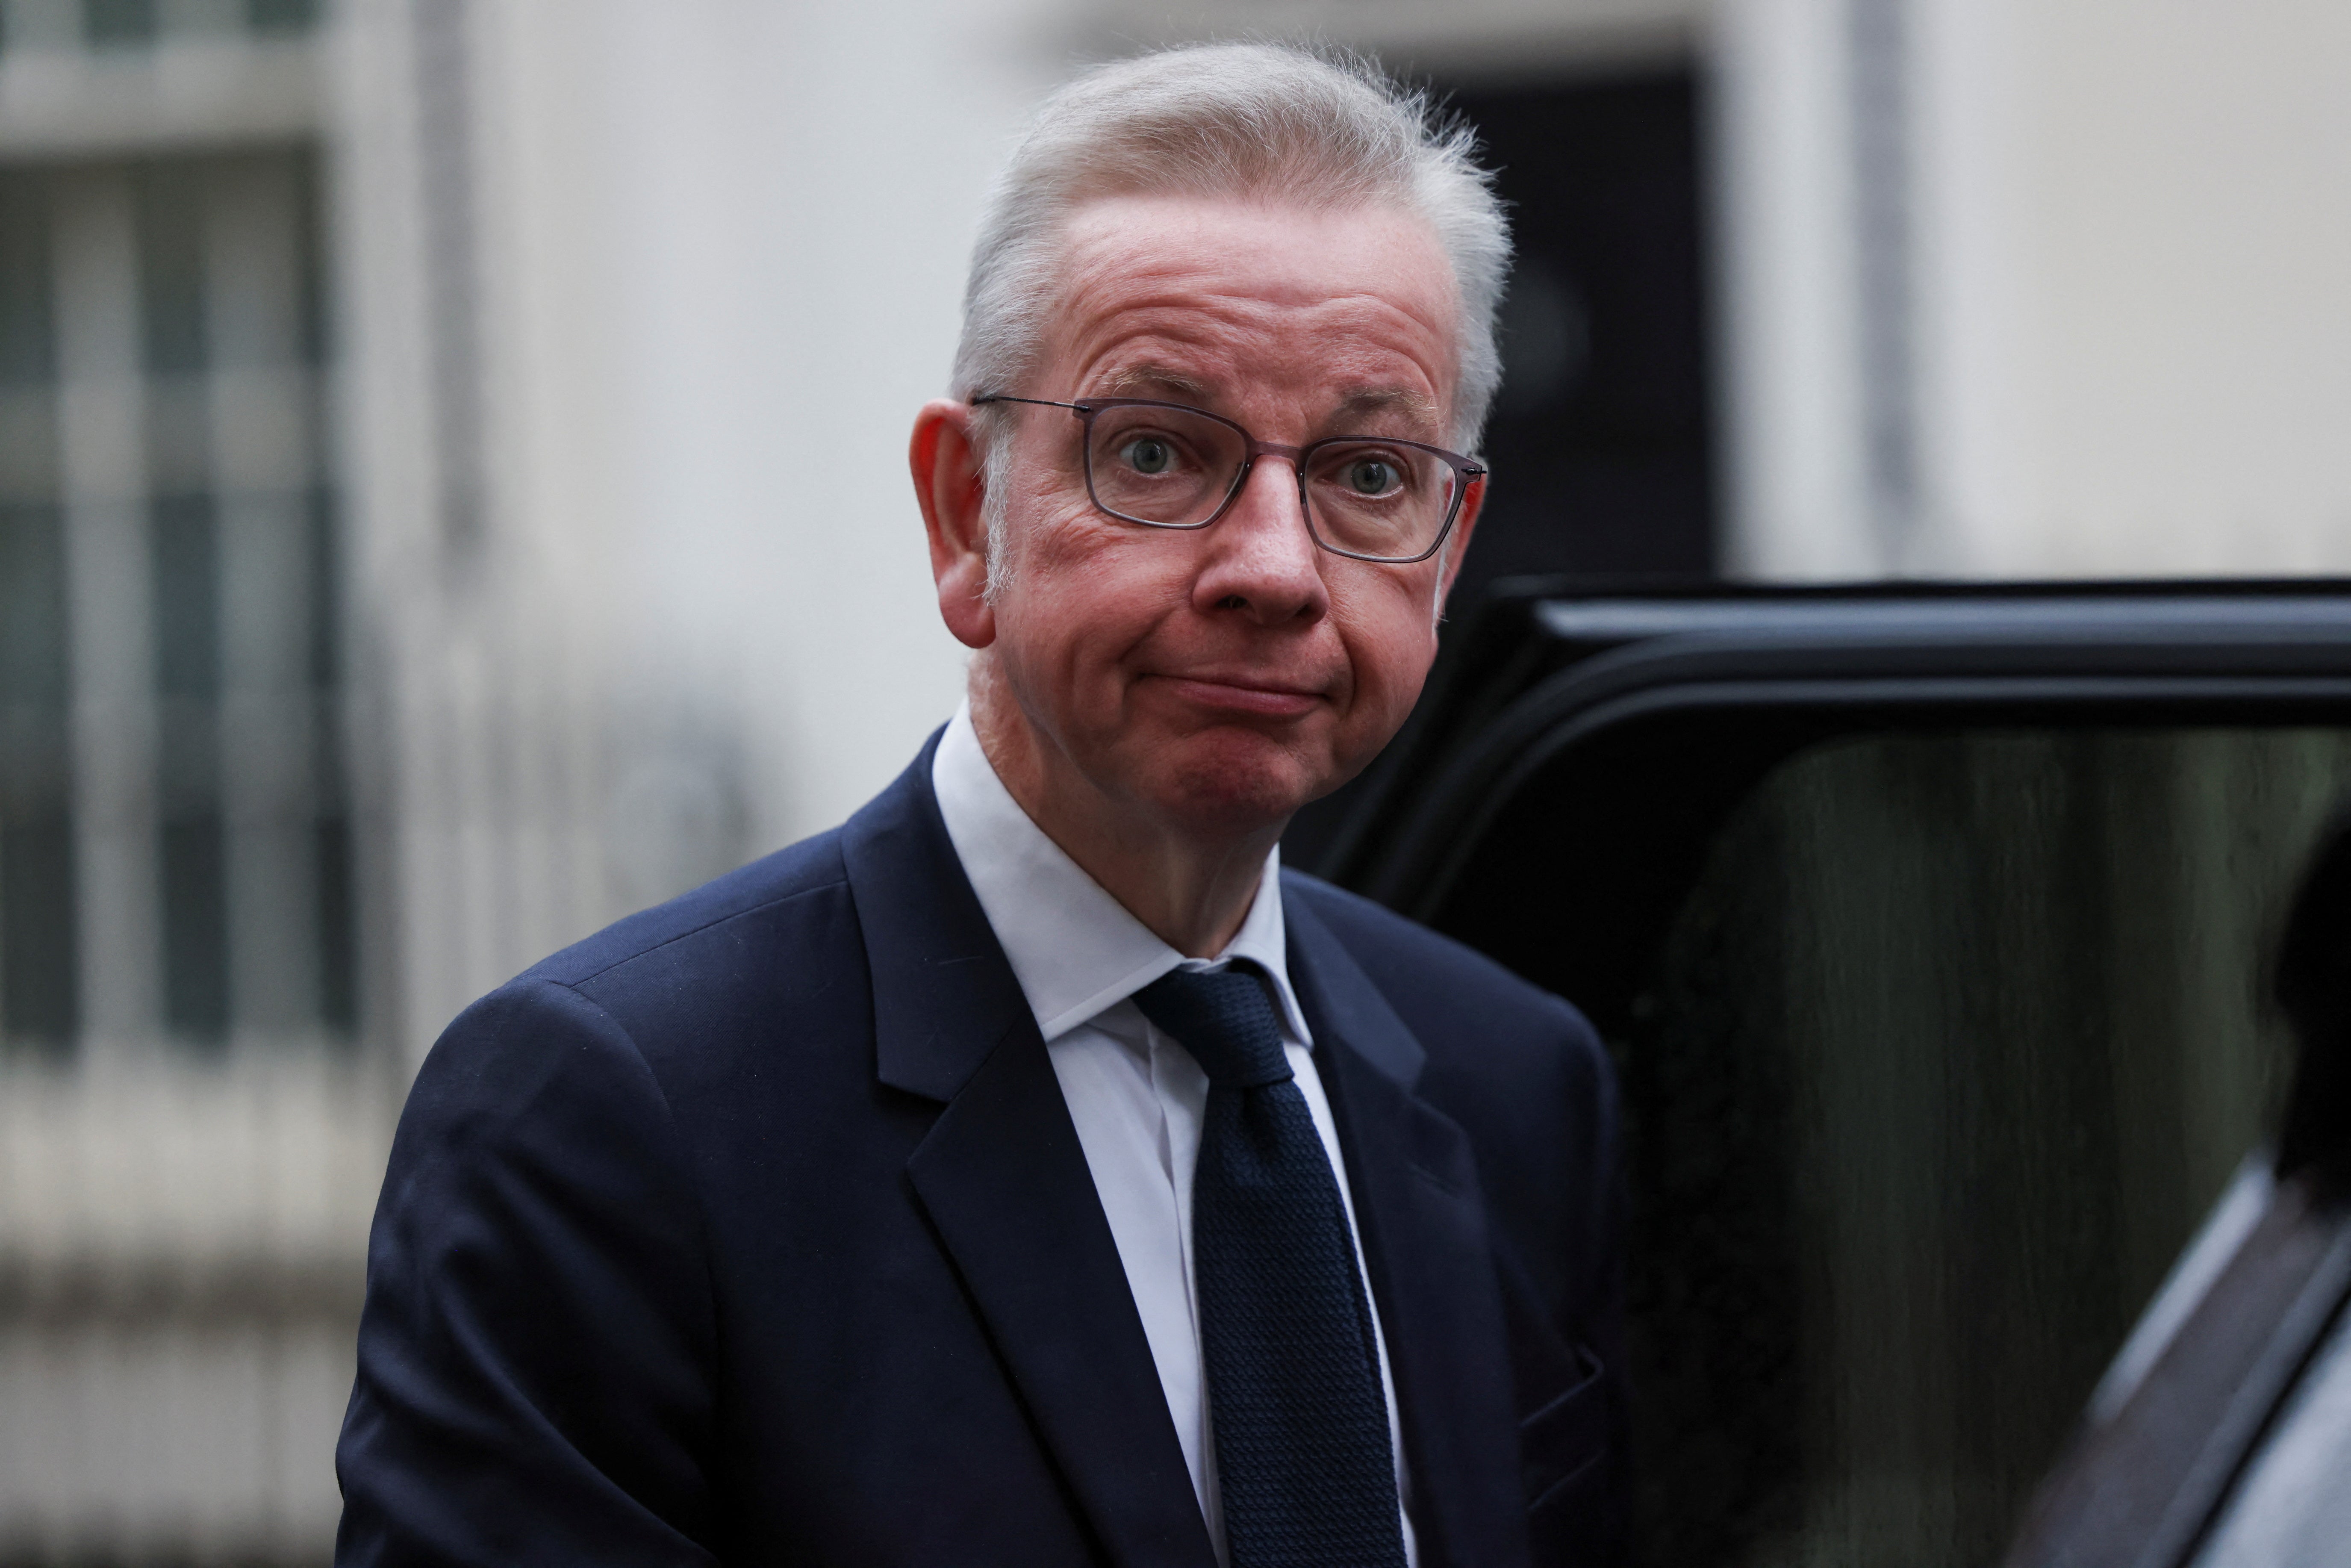 Outgoing Levelling Up Minister, Michael Gove